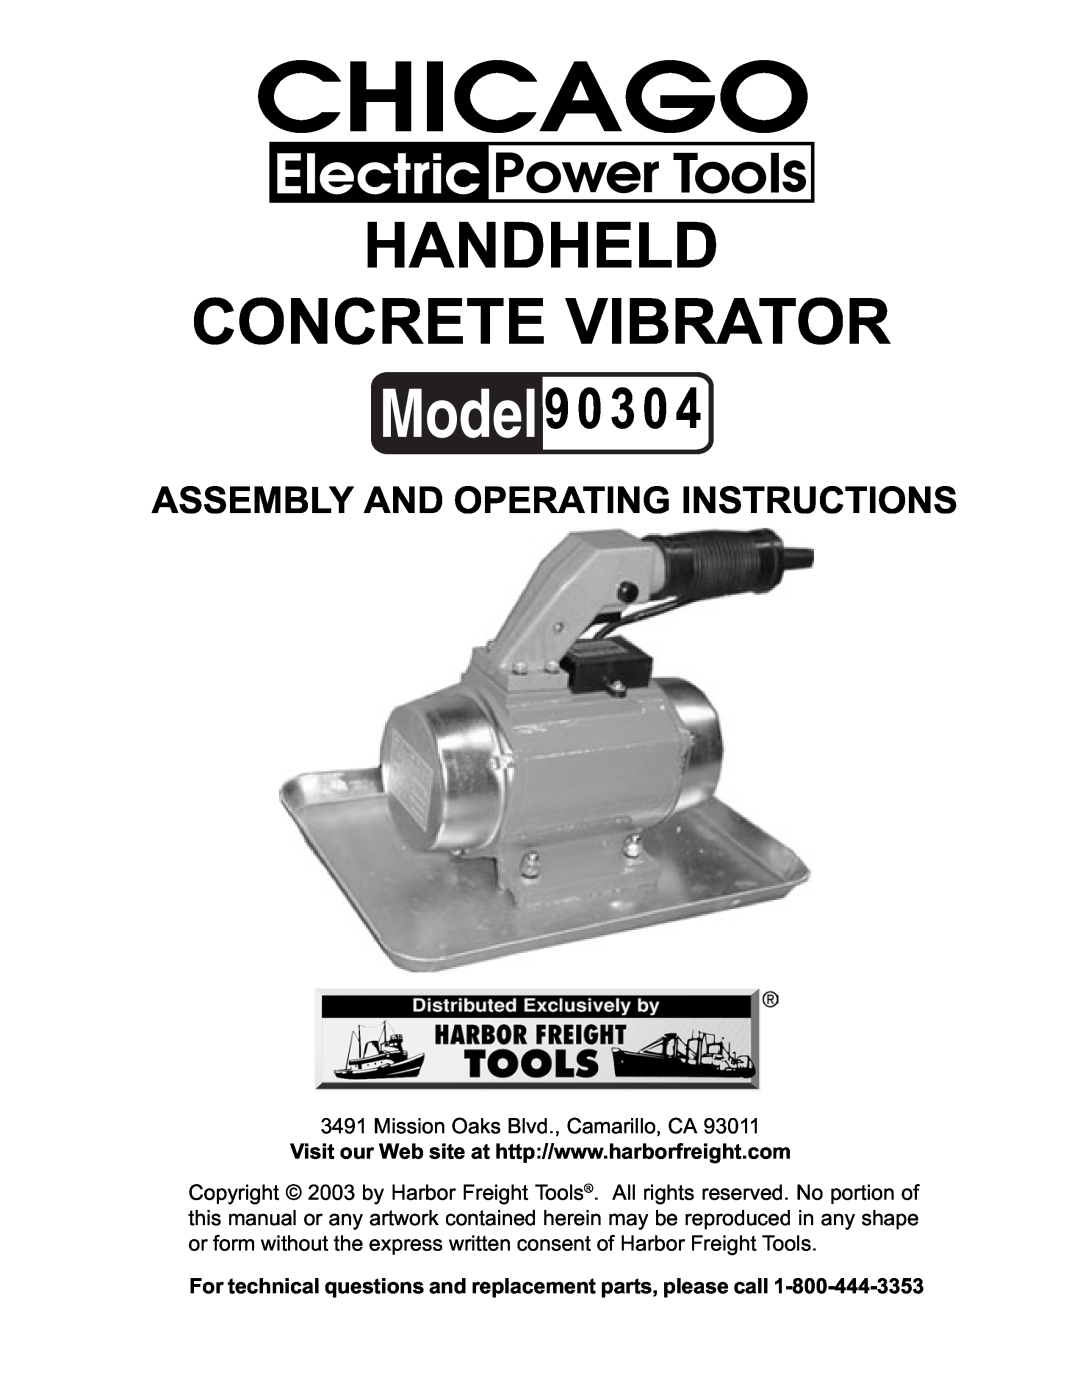 Harbor Freight Tools 90304 operating instructions Handheld Concrete Vibrator, 9 0 3, Assembly And Operating Instructions 